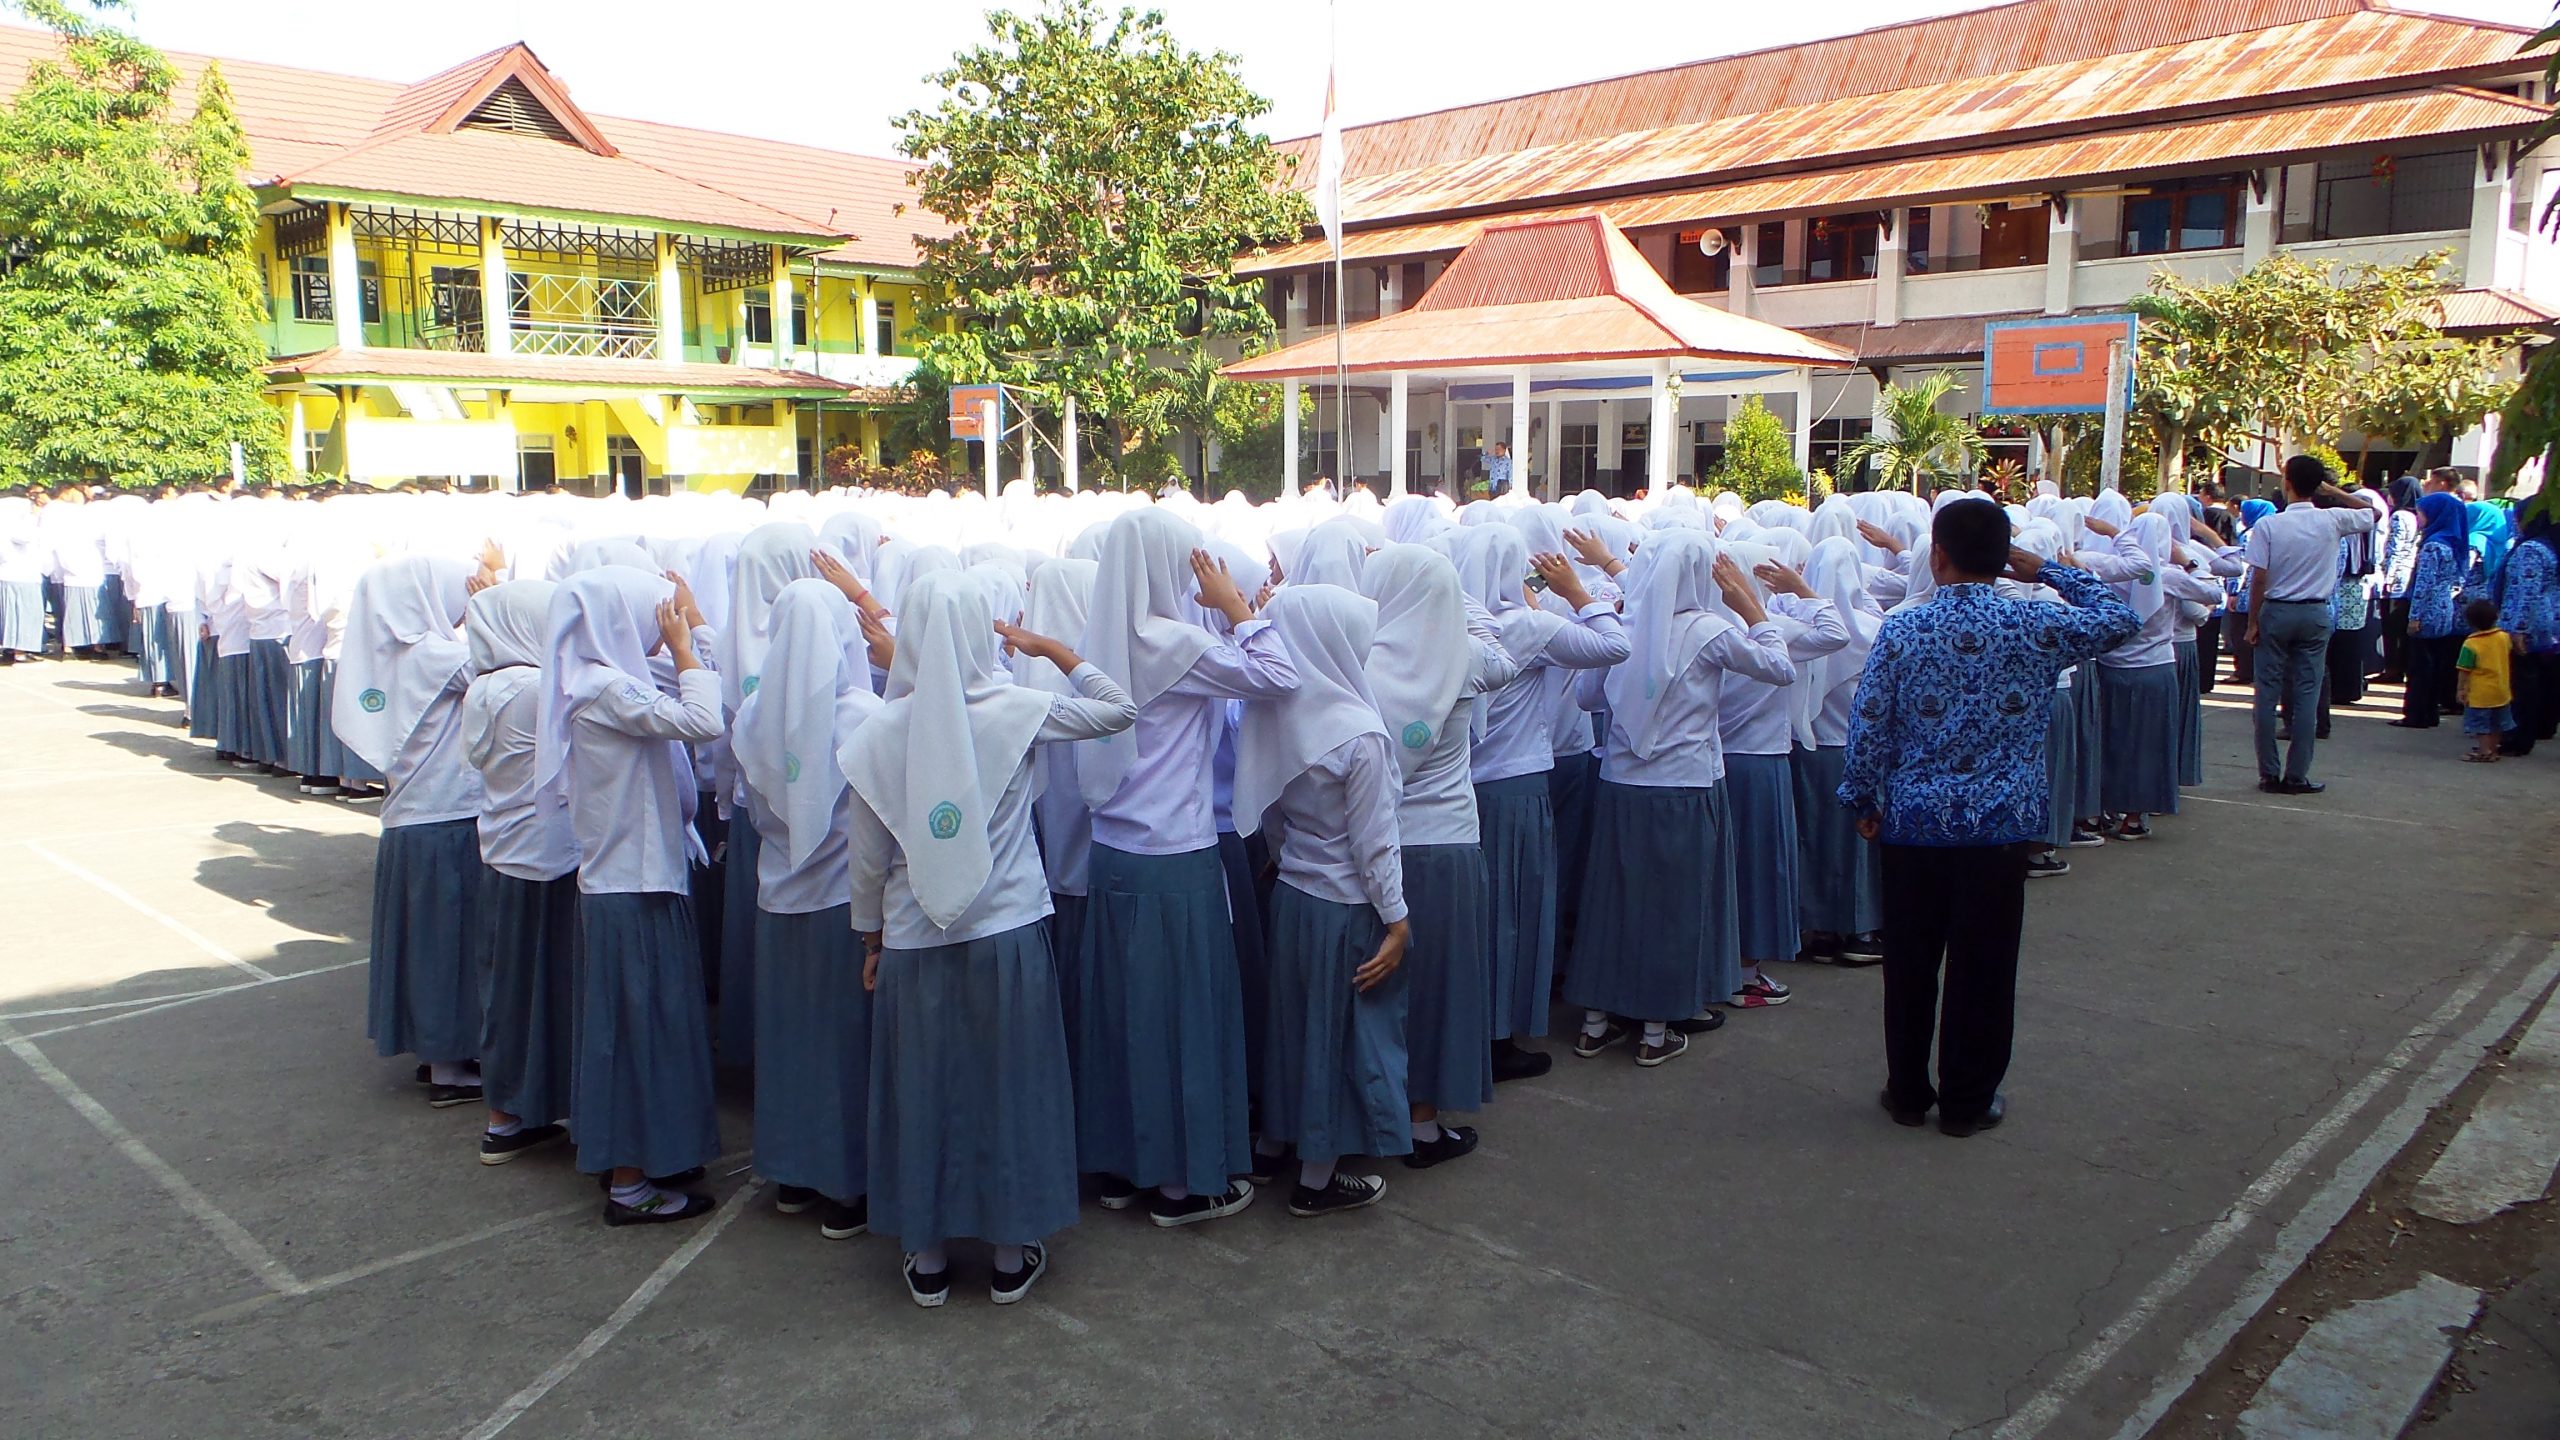 Students salute the flag during a ceremony at the public madrasah. Photo courtesy of the author

